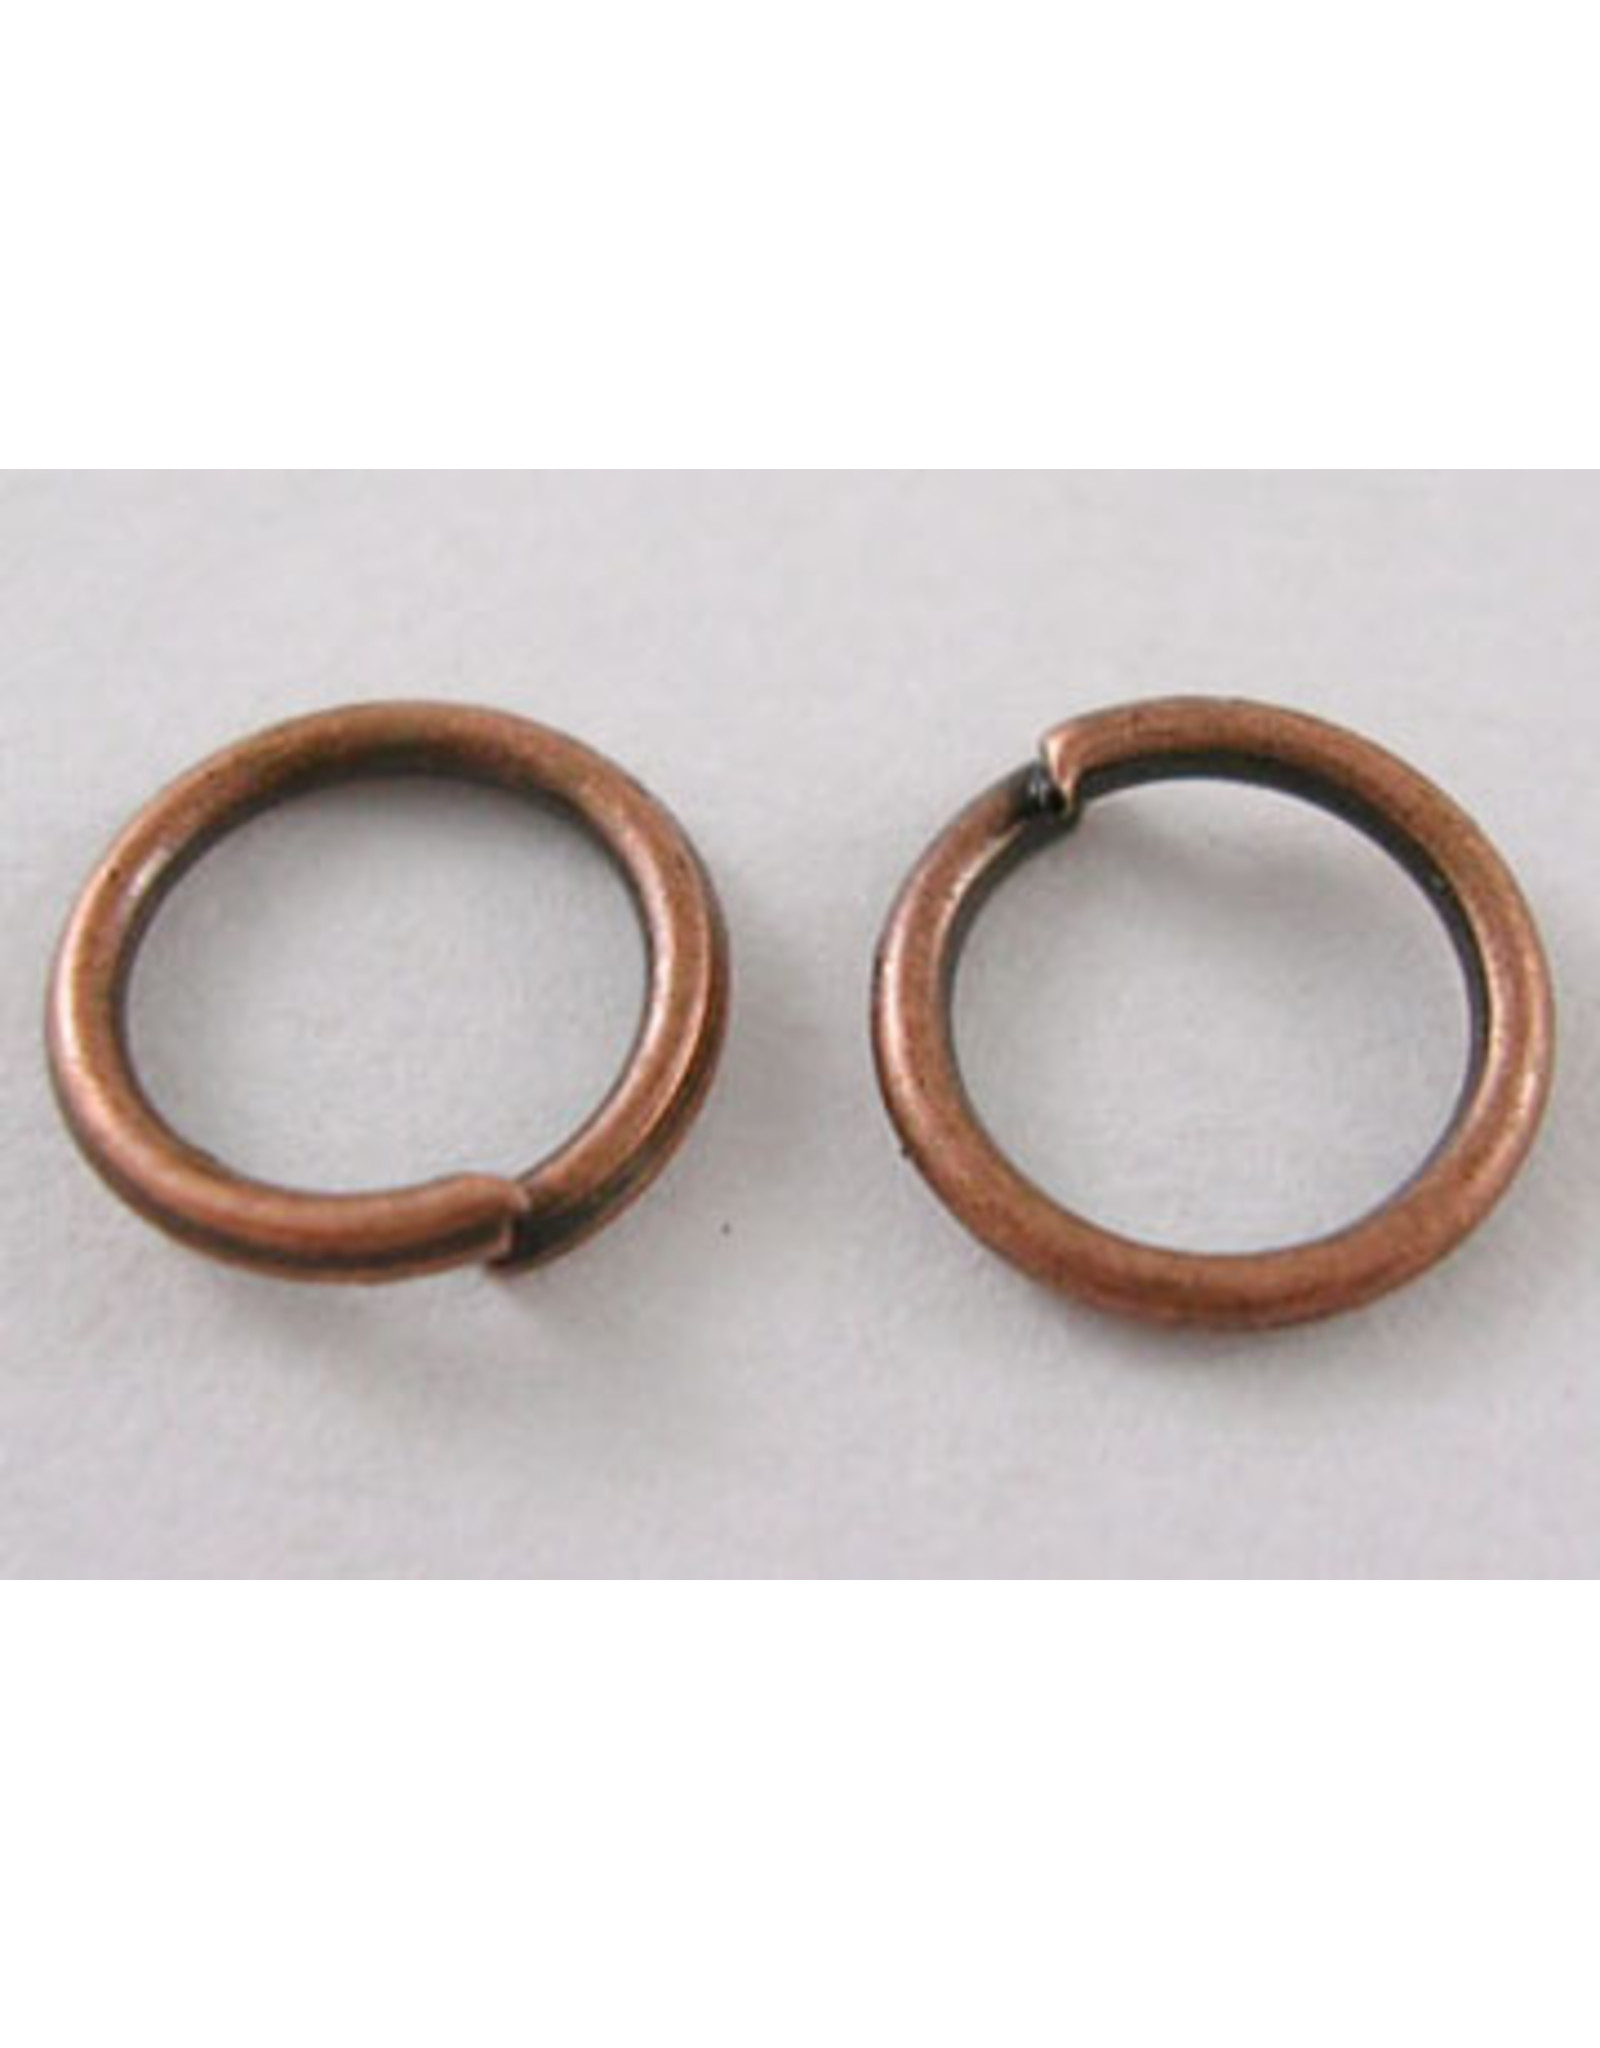 Jump Ring 6mm Antique Copper  approx 22g  x100 NF